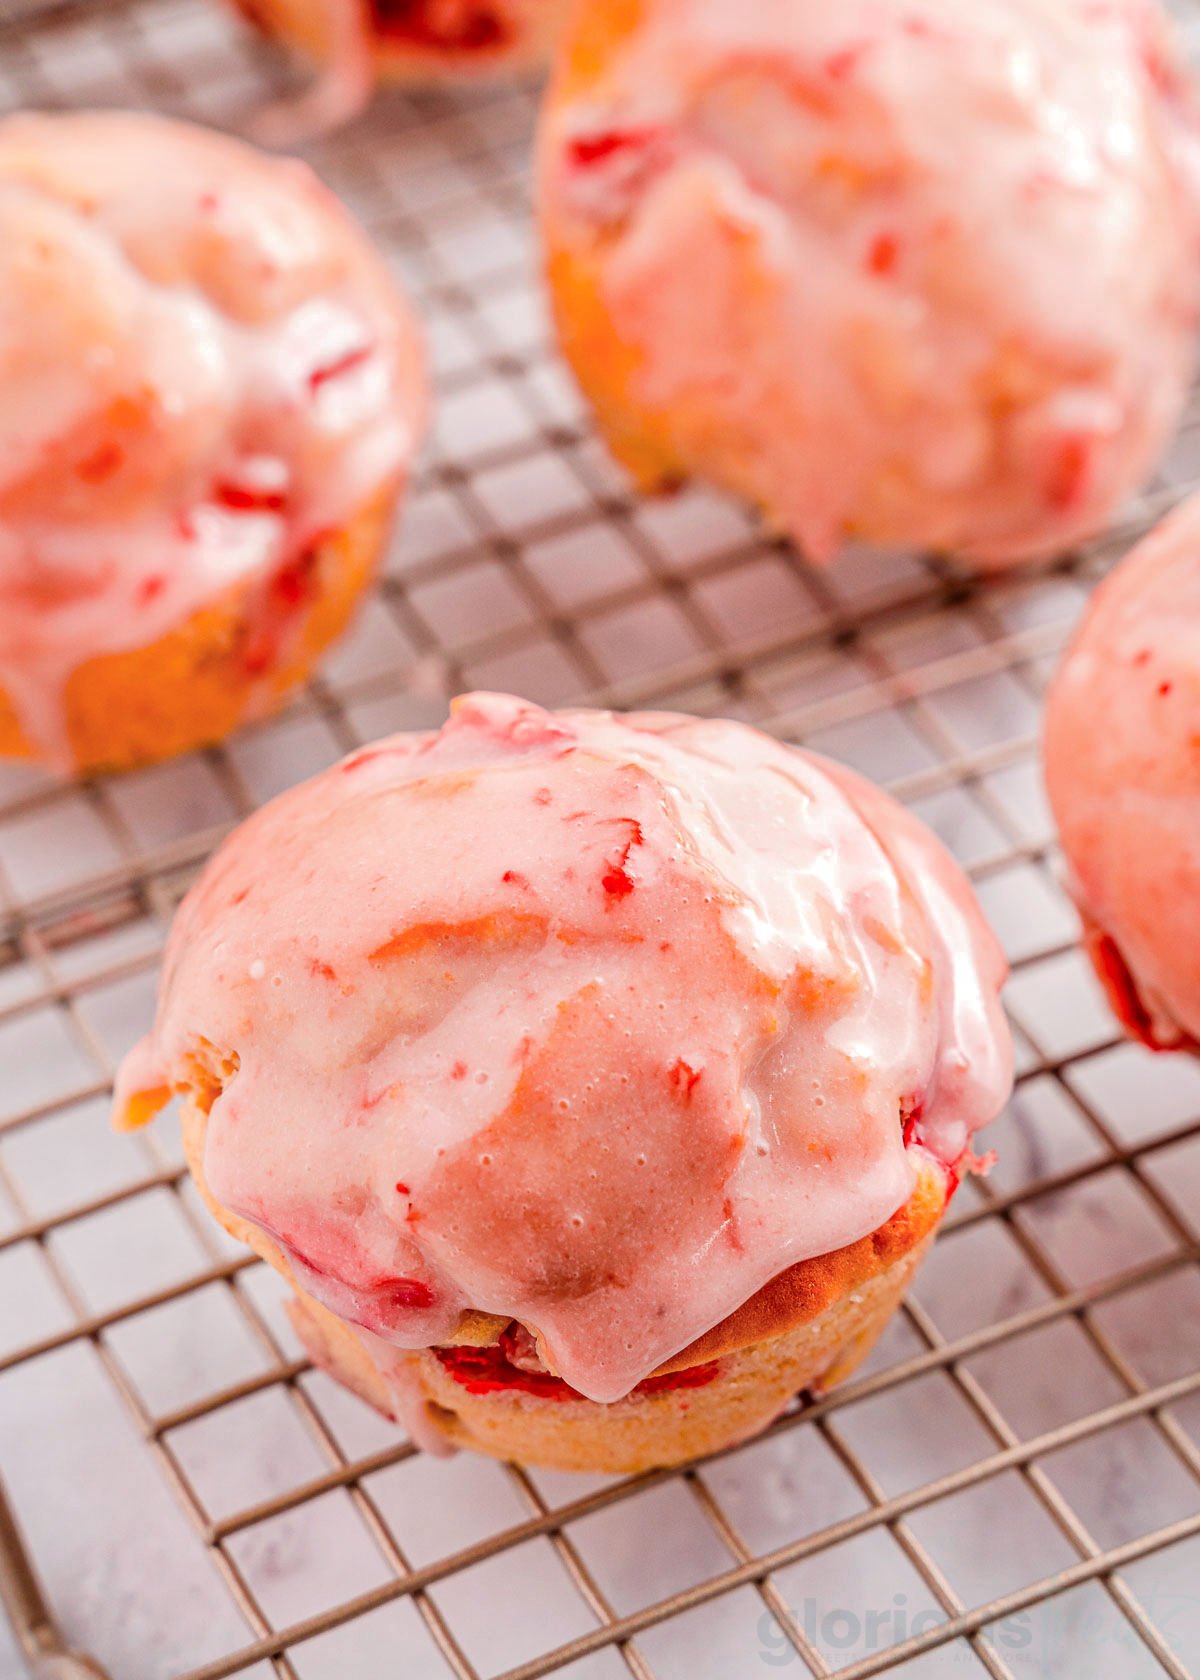 strawberry muffins on a wire rack.. One muffin is focused in on to show the texture of the strawberry glaze on top.